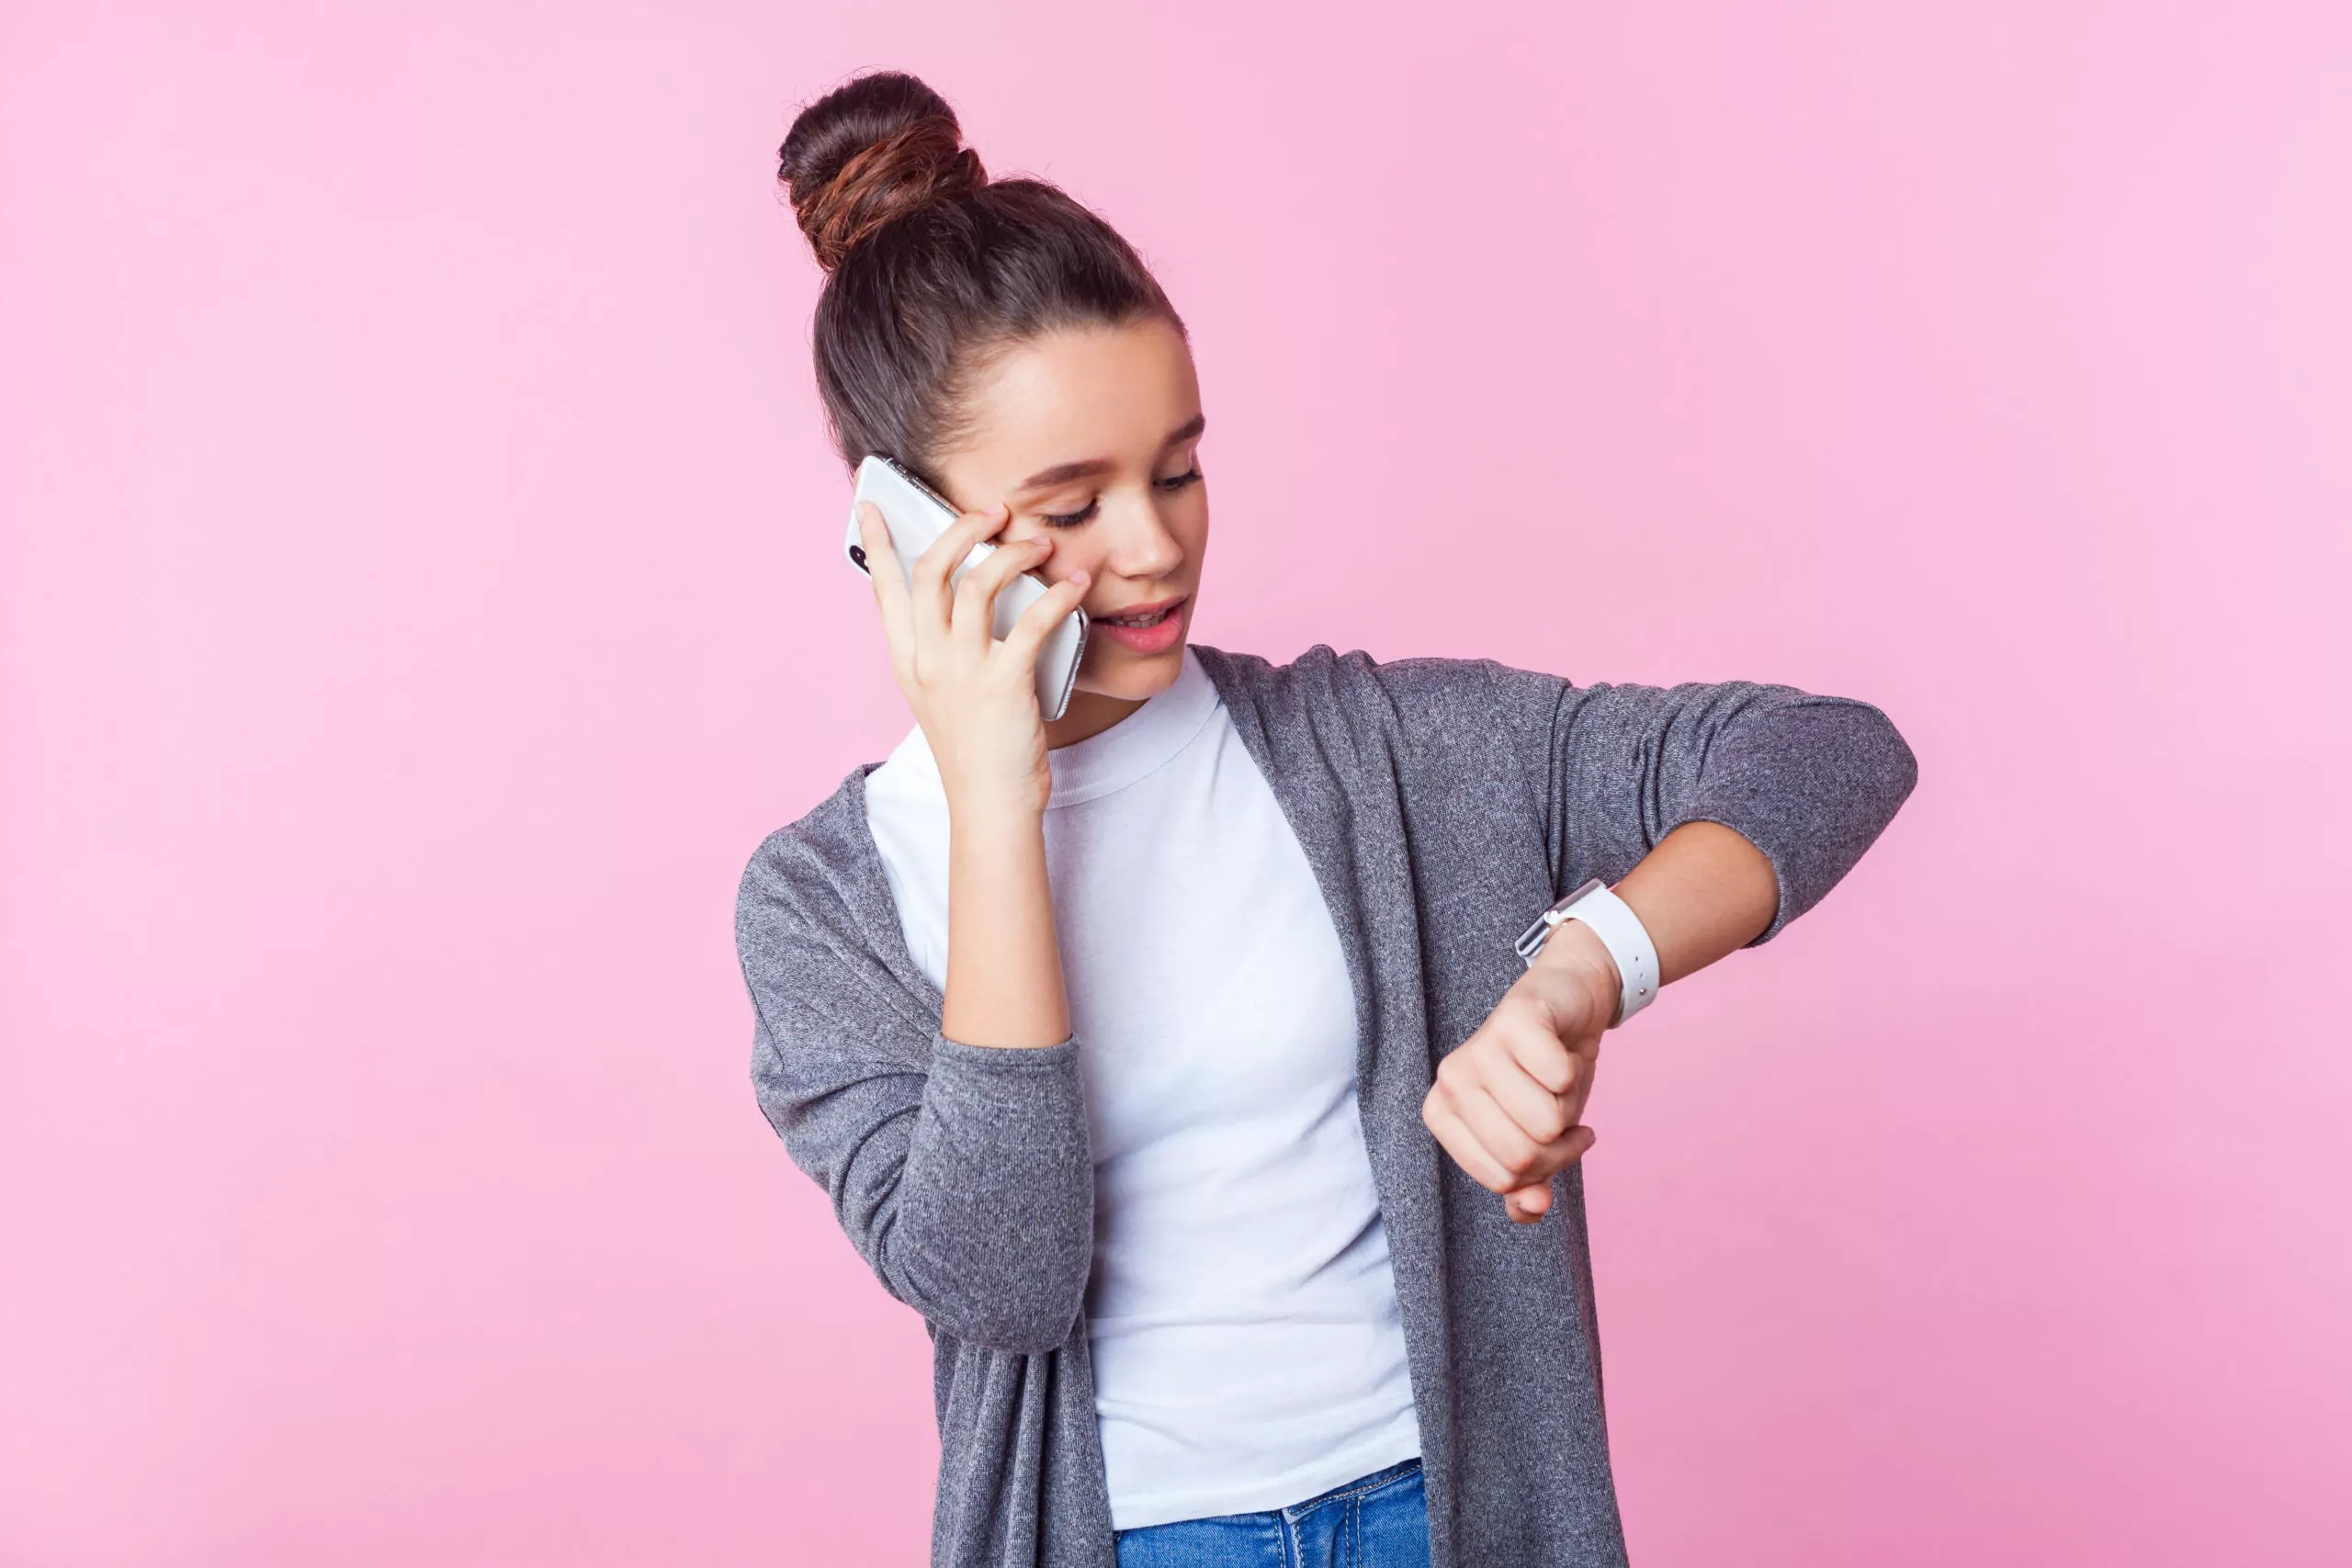 Teenager looking at her watch while talking on the phone, pink background.